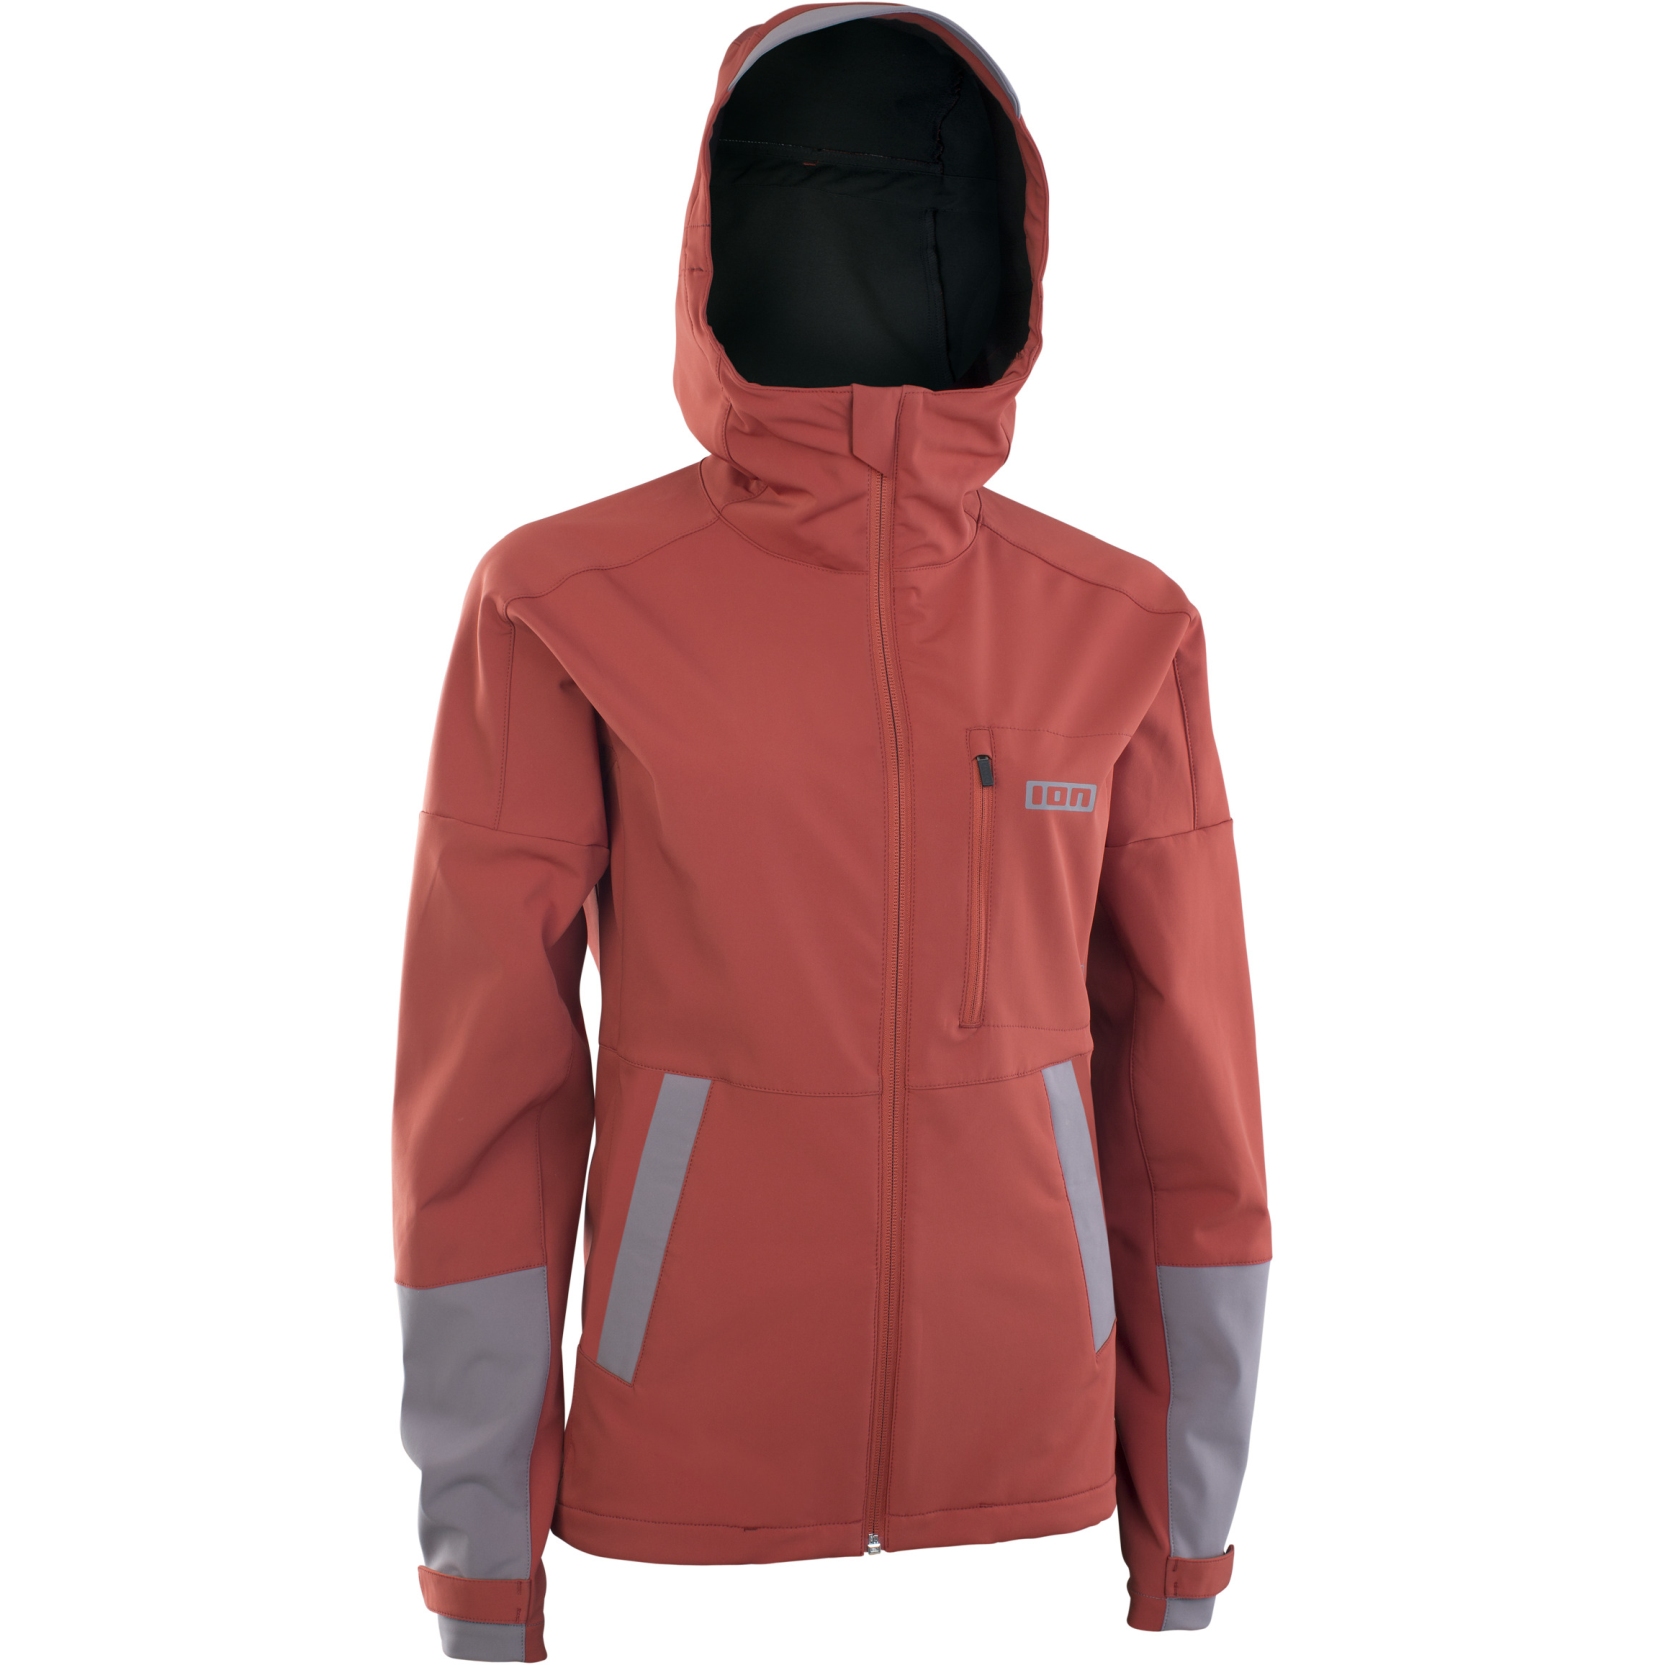 Foto de ION Bike Outerwear 2 Capas Chaqueta Softshell Mujer - Shelter - Spicy Red